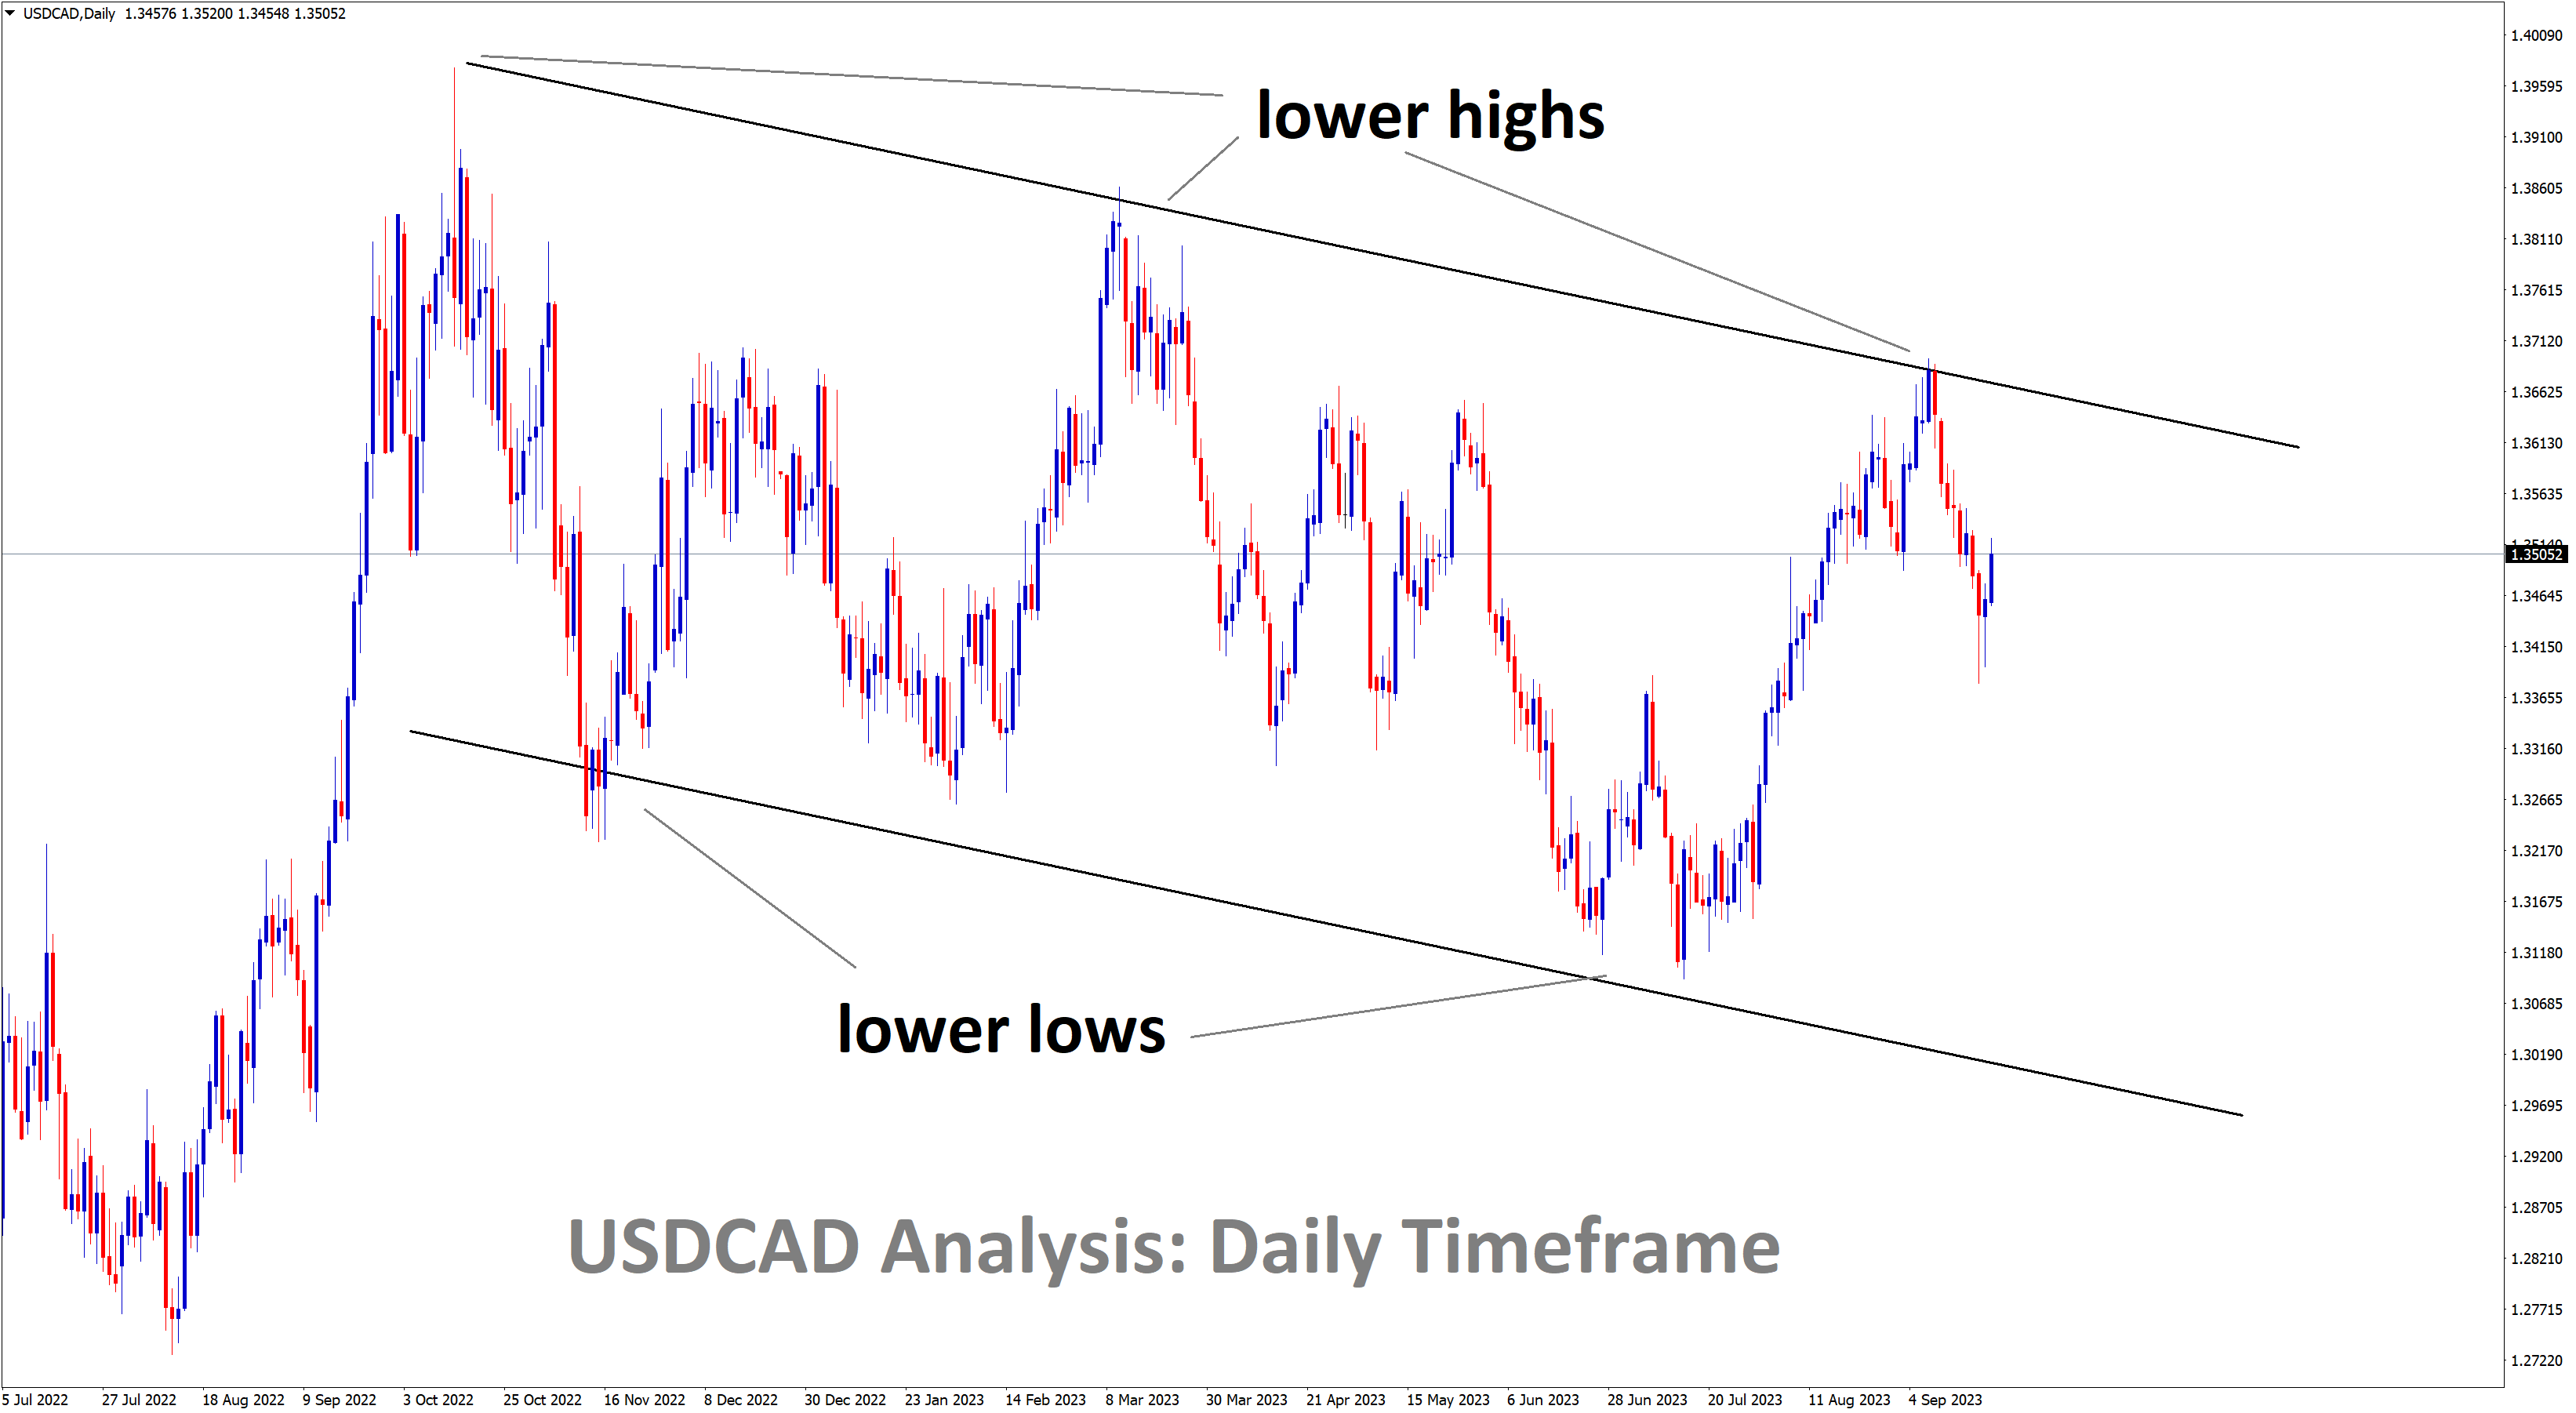 +680 Points Reached in USDCAD Sell signal after falling from the lower high area of the Descending channel